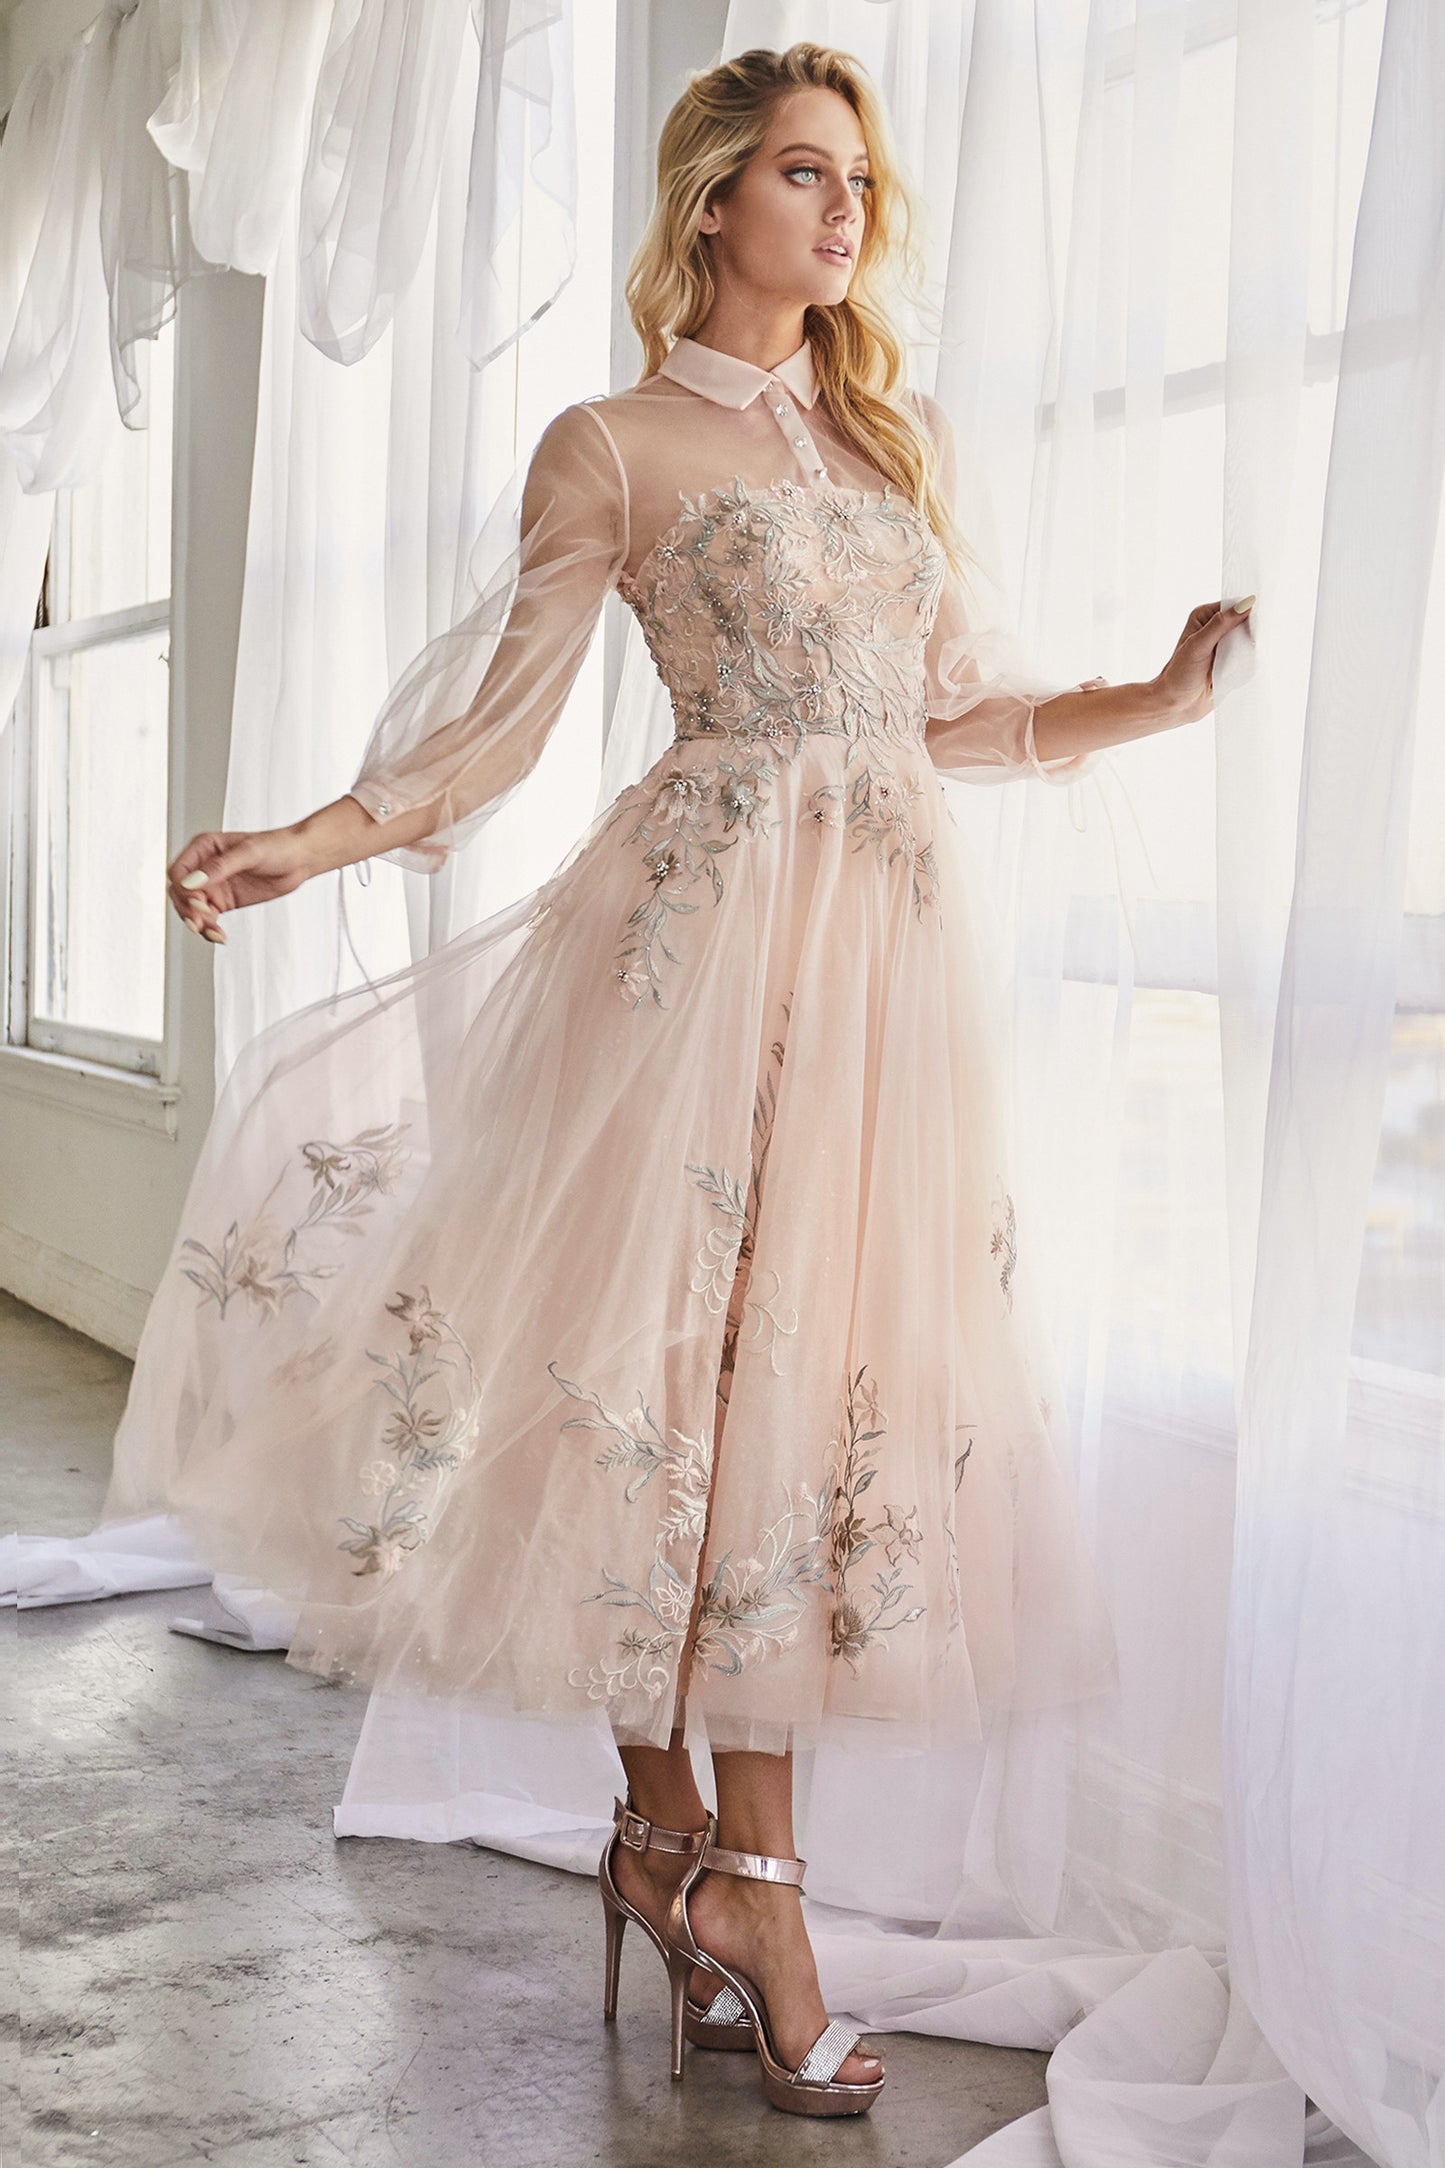 The Duchesa is perfectly appropriate for any special occasion. A fan favorite, this a-line cocktail dress in a beautiful pastel hue features a classic collar with an illusion yoke that connects to a corset-structured bodice overlayed with floral embroider